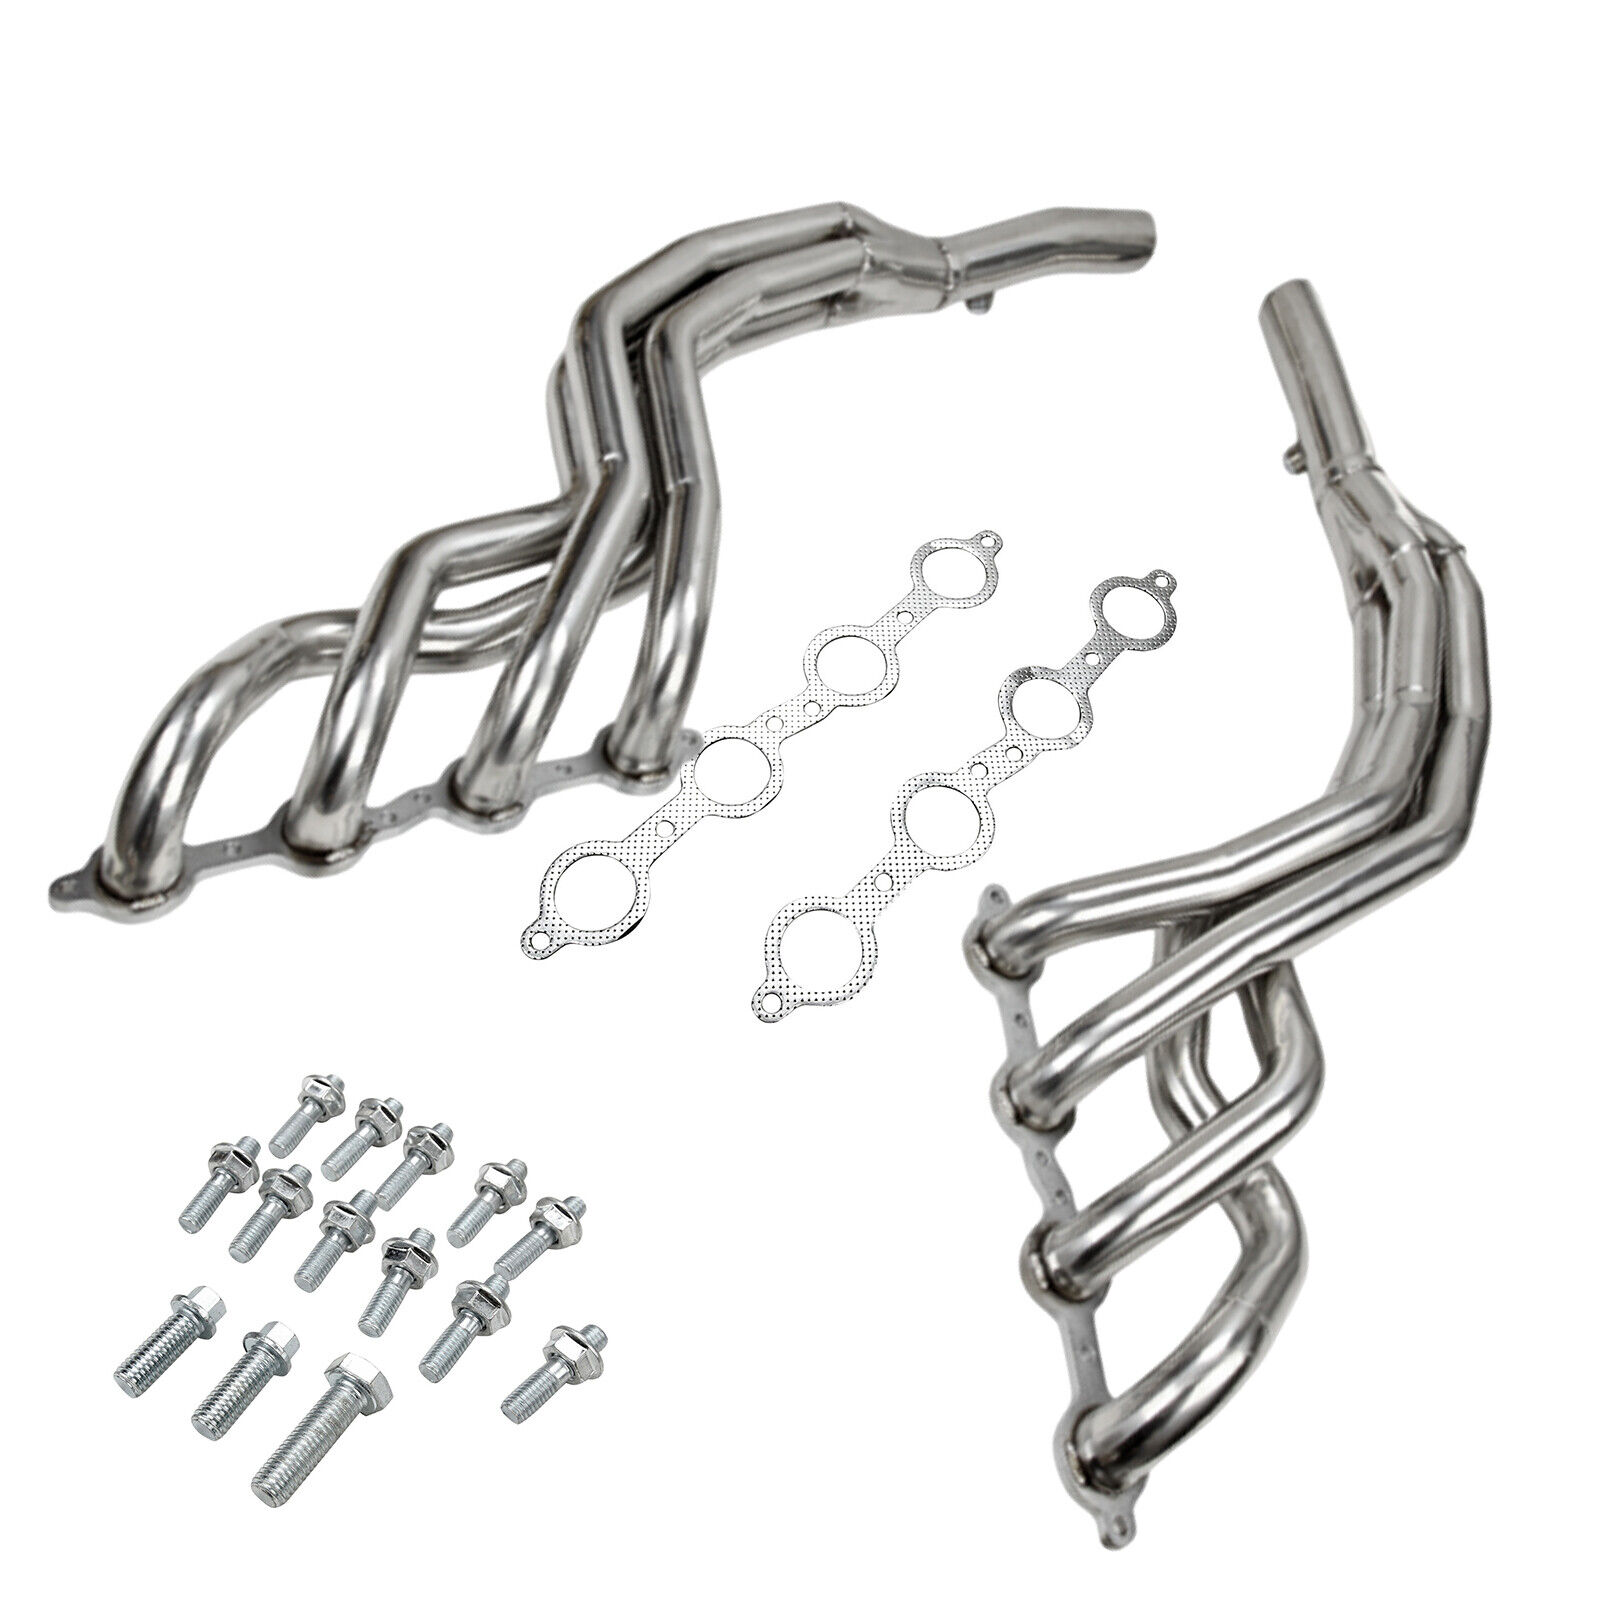 Long Tube Manifold Exhaust Headers Fits for 2010-2015 Chevy Camaro SS 6.2L V8